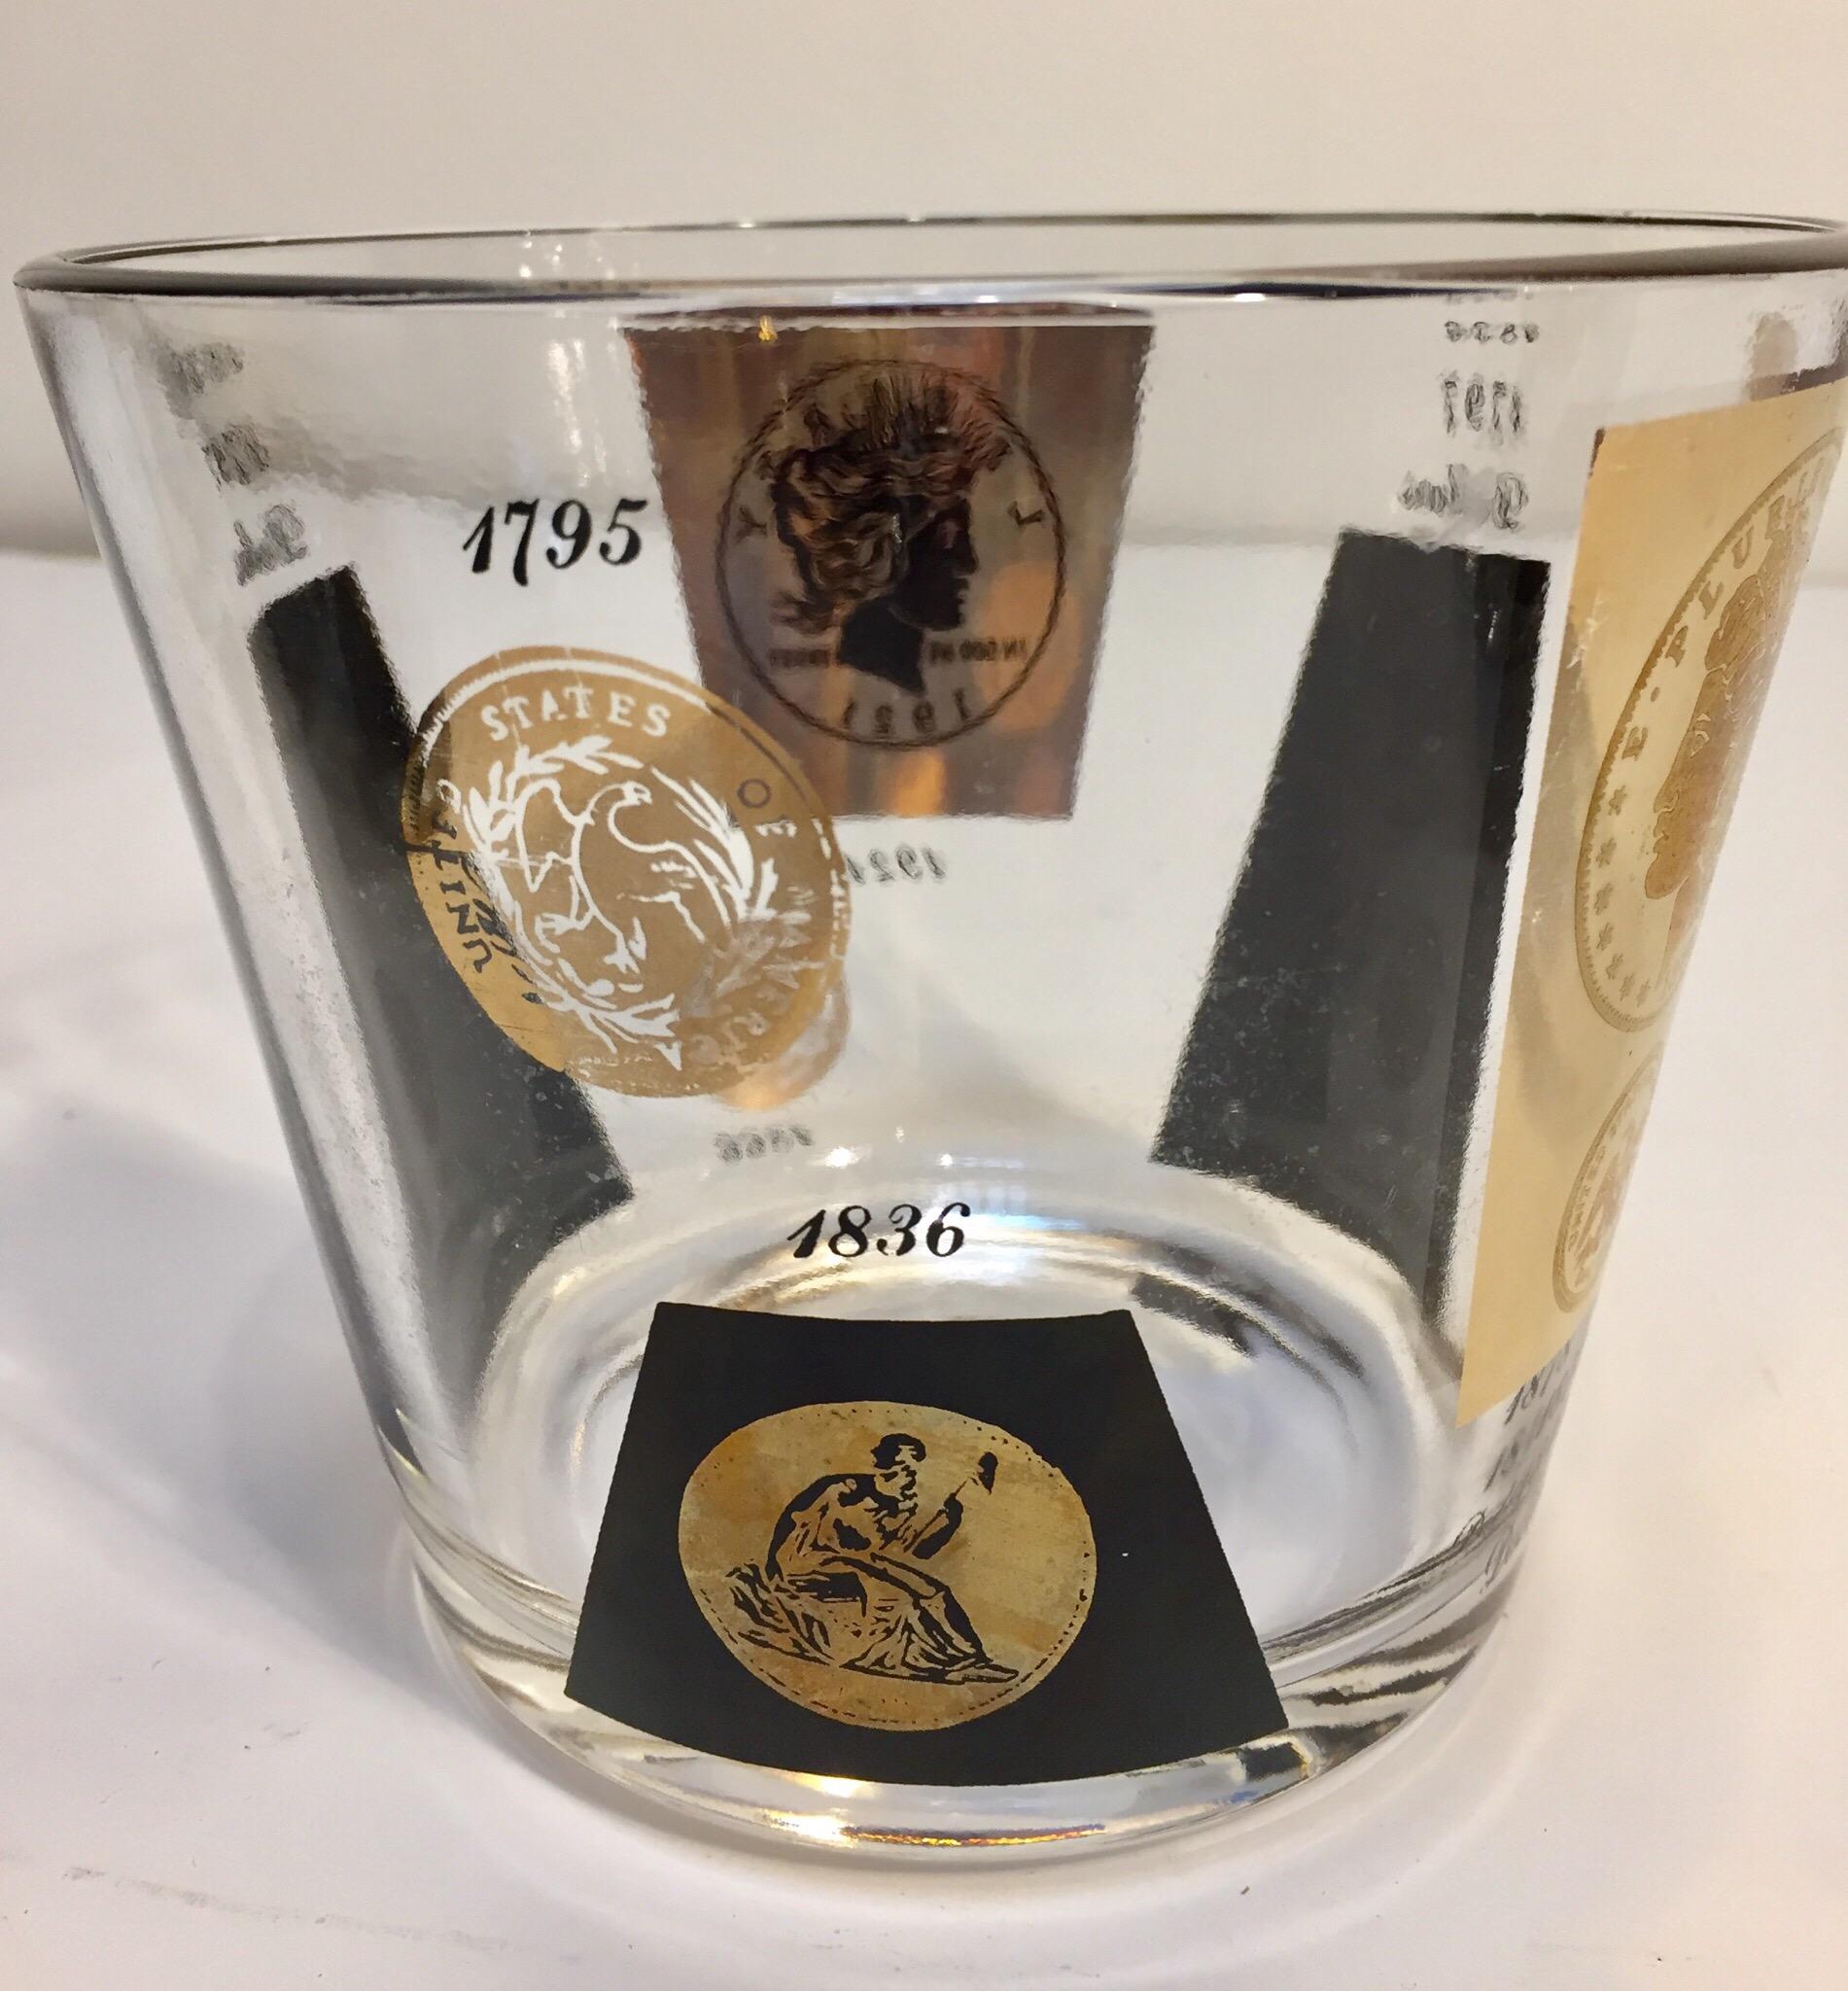 Midcentury 22-karat gold printed drink glasses presidential coin T.
Set of 7 pieces.
6 high ball glasses and one ice bucket.
The glasses feature 